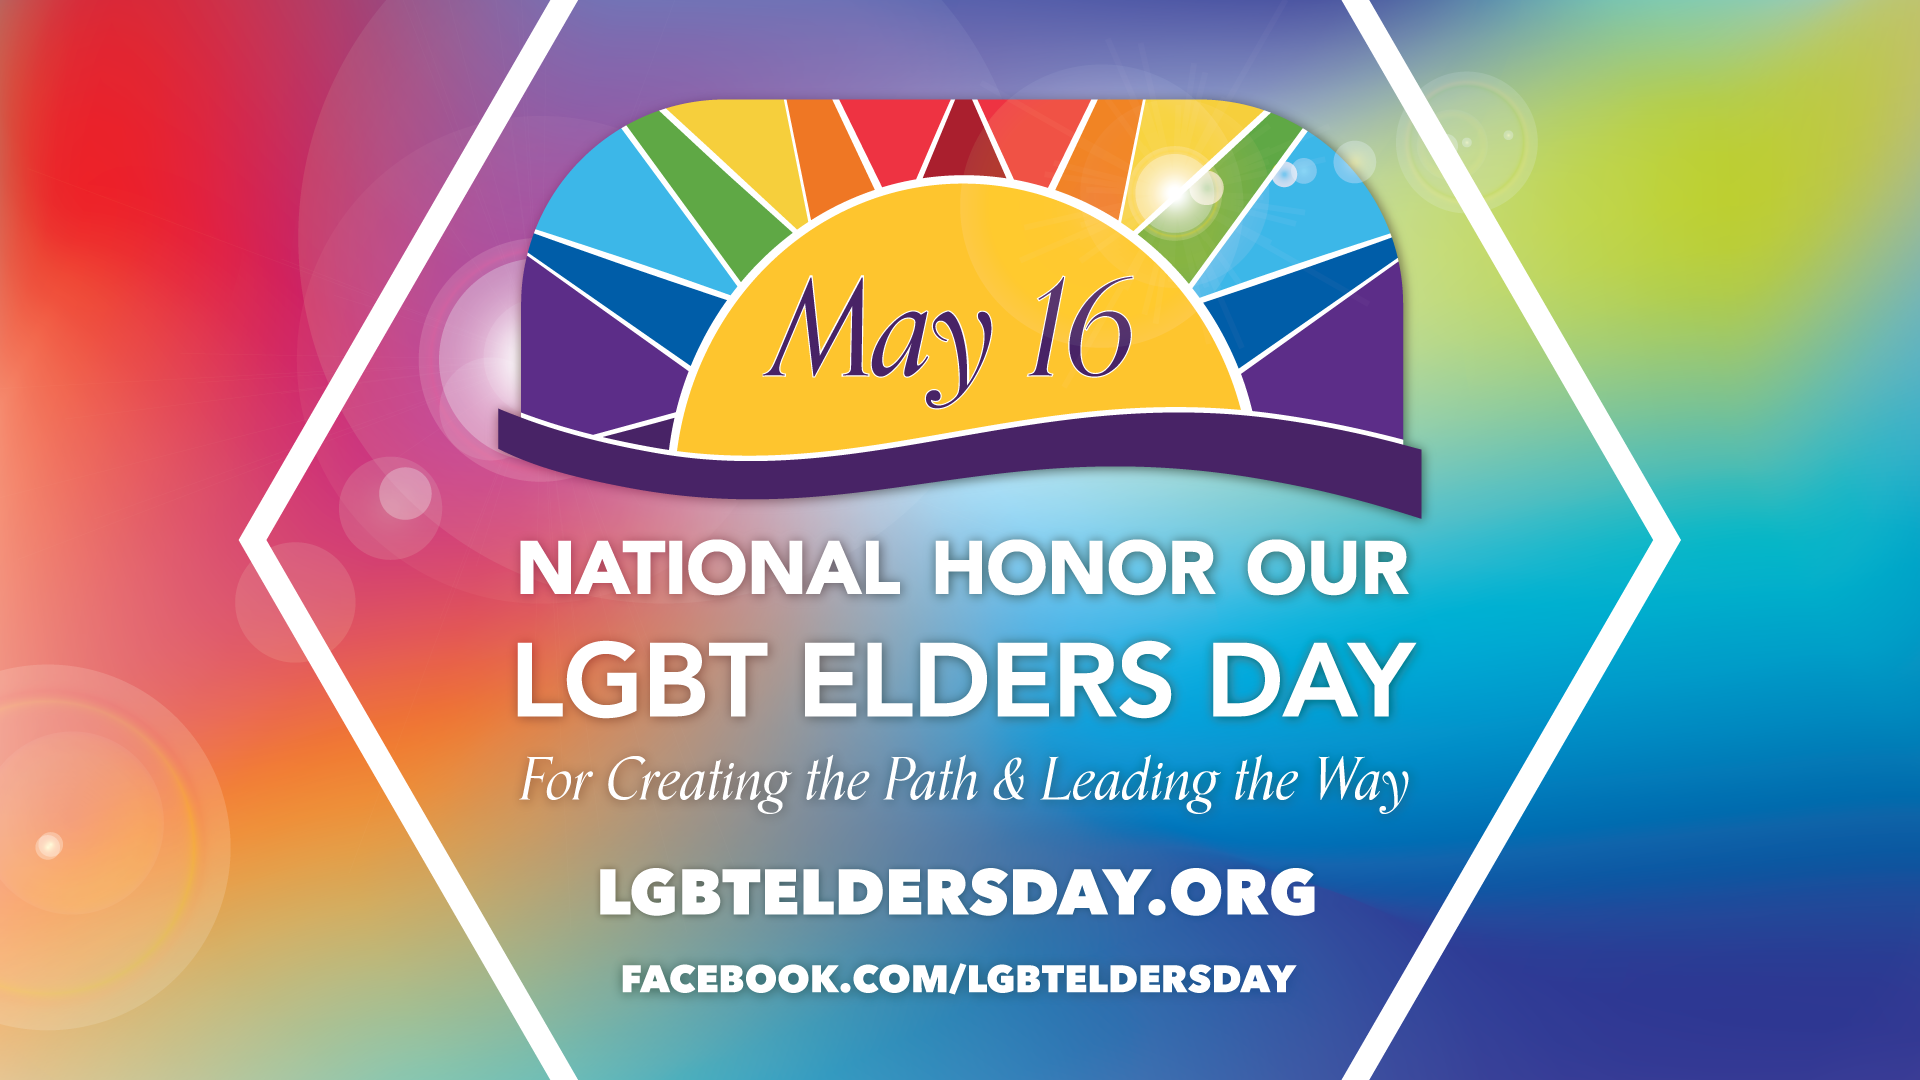 May 16th National Honor Our LGBT Elders Day For Creating the Path and Leading the Way LGBTELDERSDAY.ORG Facebook.com/LGBTELDERSDAY